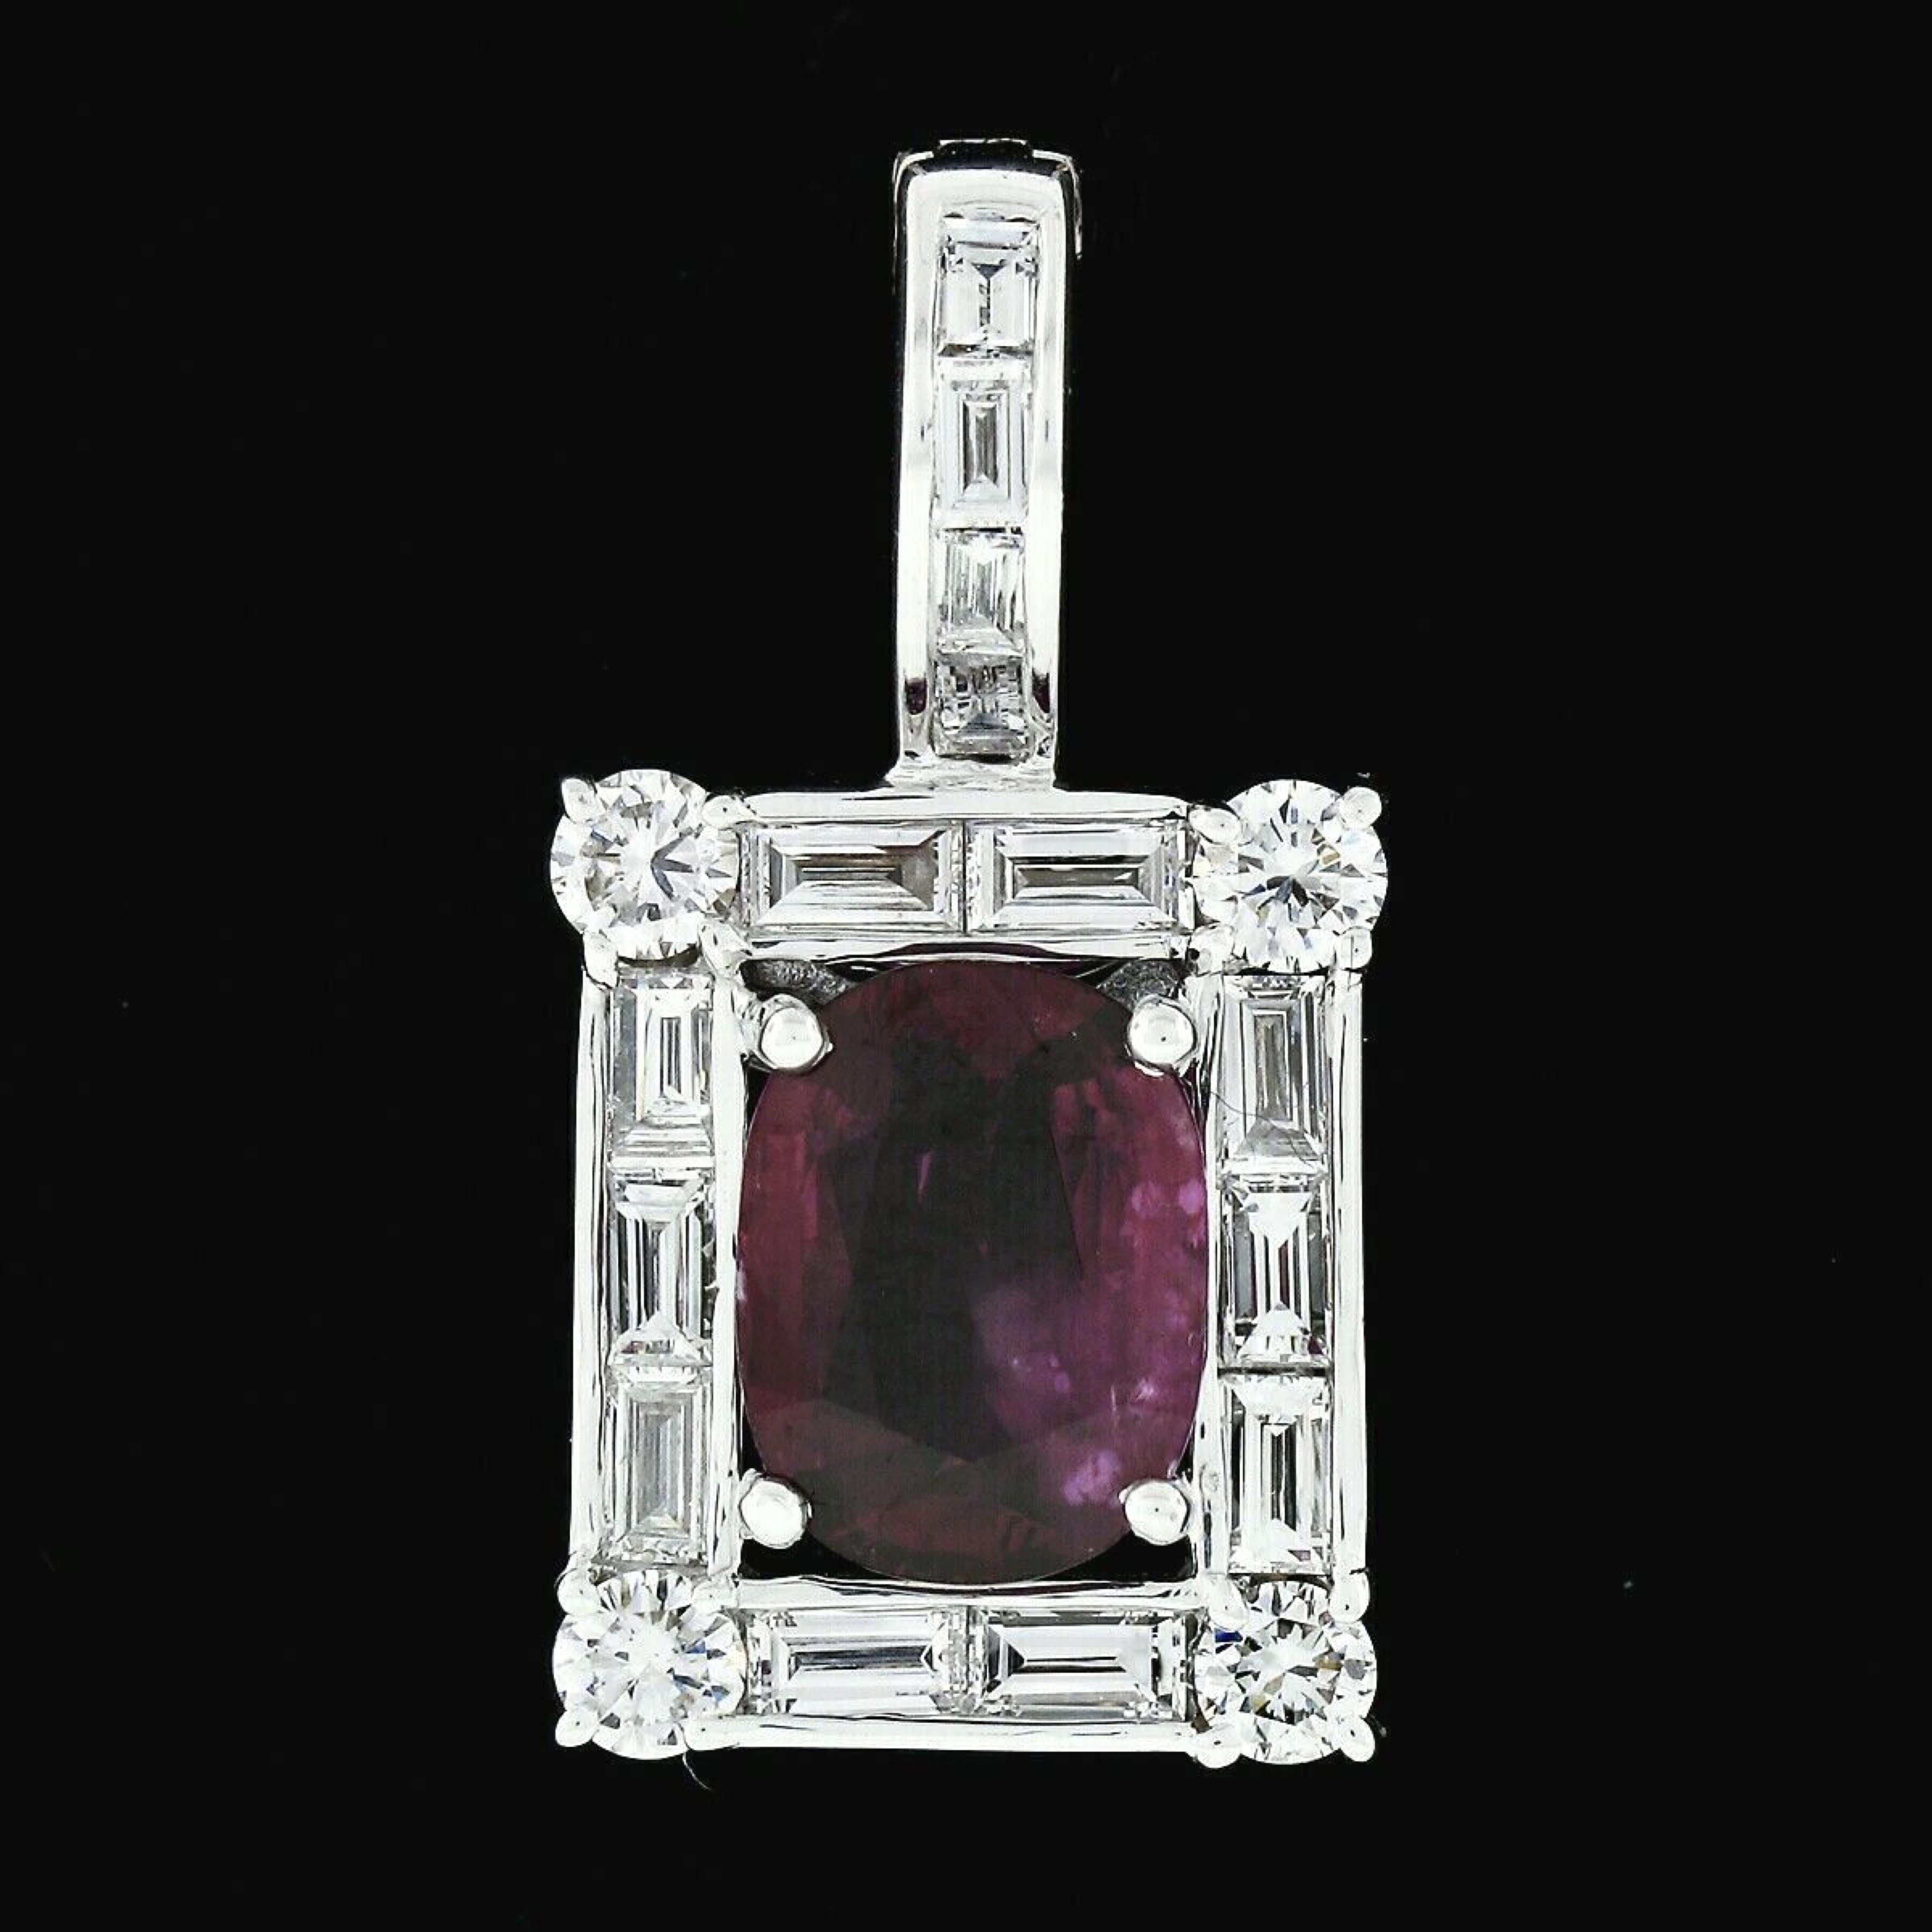 Here we have an absolutely gorgeous vintage ruby and diamond pendant that was crafted from solid 18k white gold. This pendant features an exactly 1.84 carat, GIA certified, oval cut ruby prong set at its center with a beautifully rich red color. The